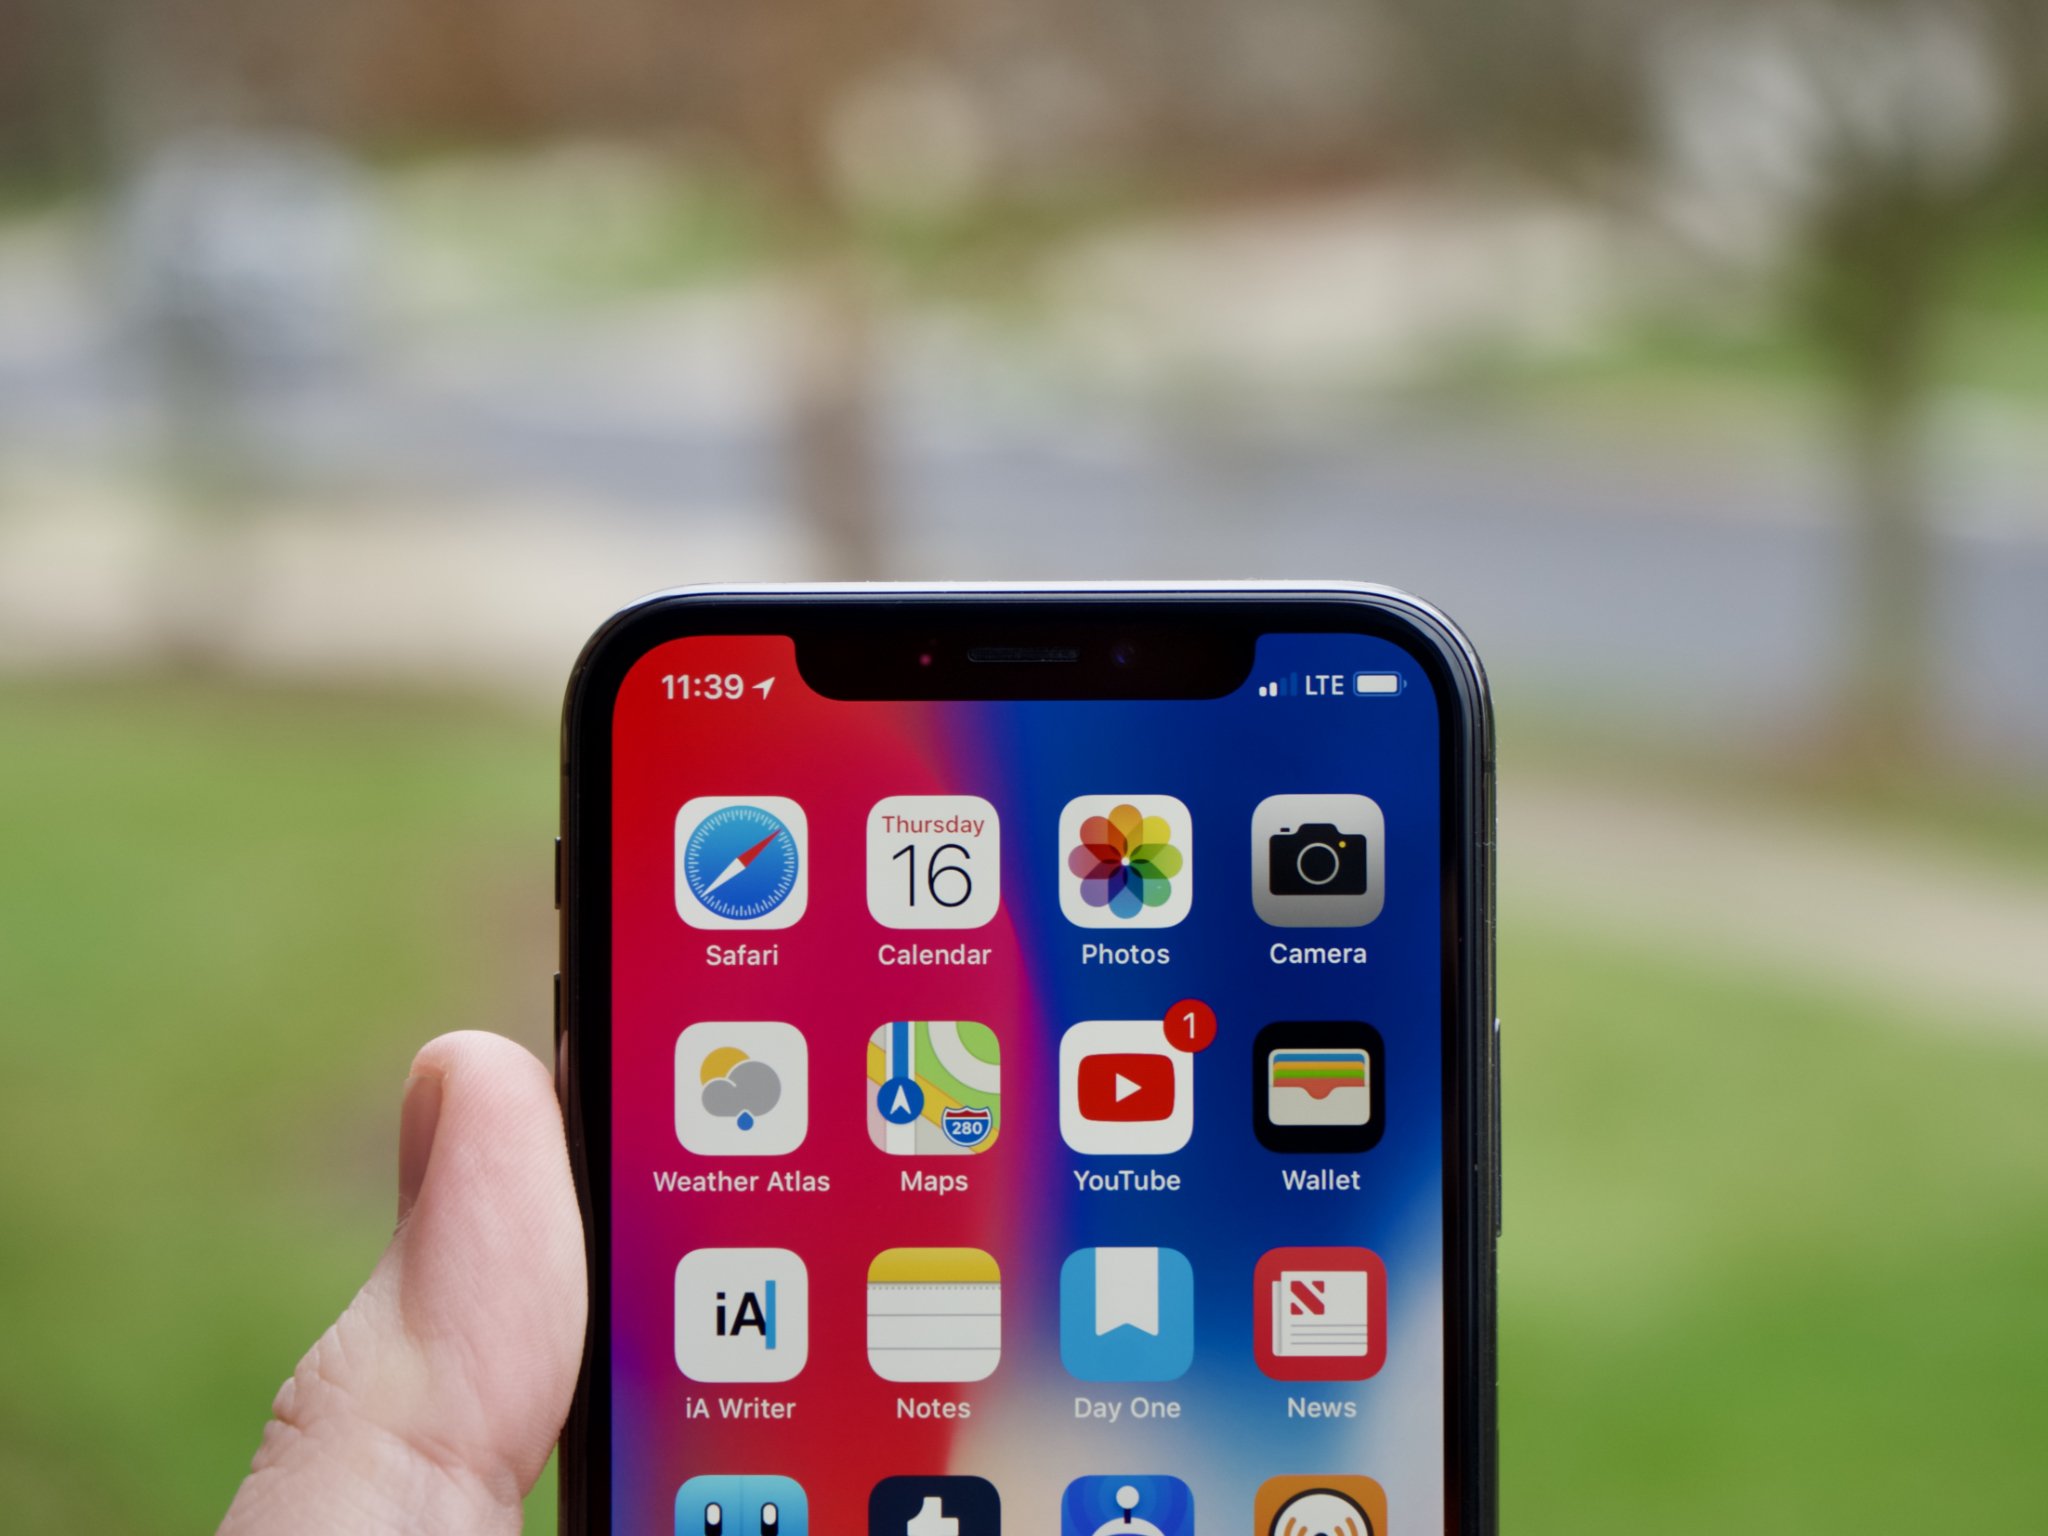 A photo of an iPhone X being held. Only the top half of the iPhone X is visible, and the home screen with multiple app icons is displayed